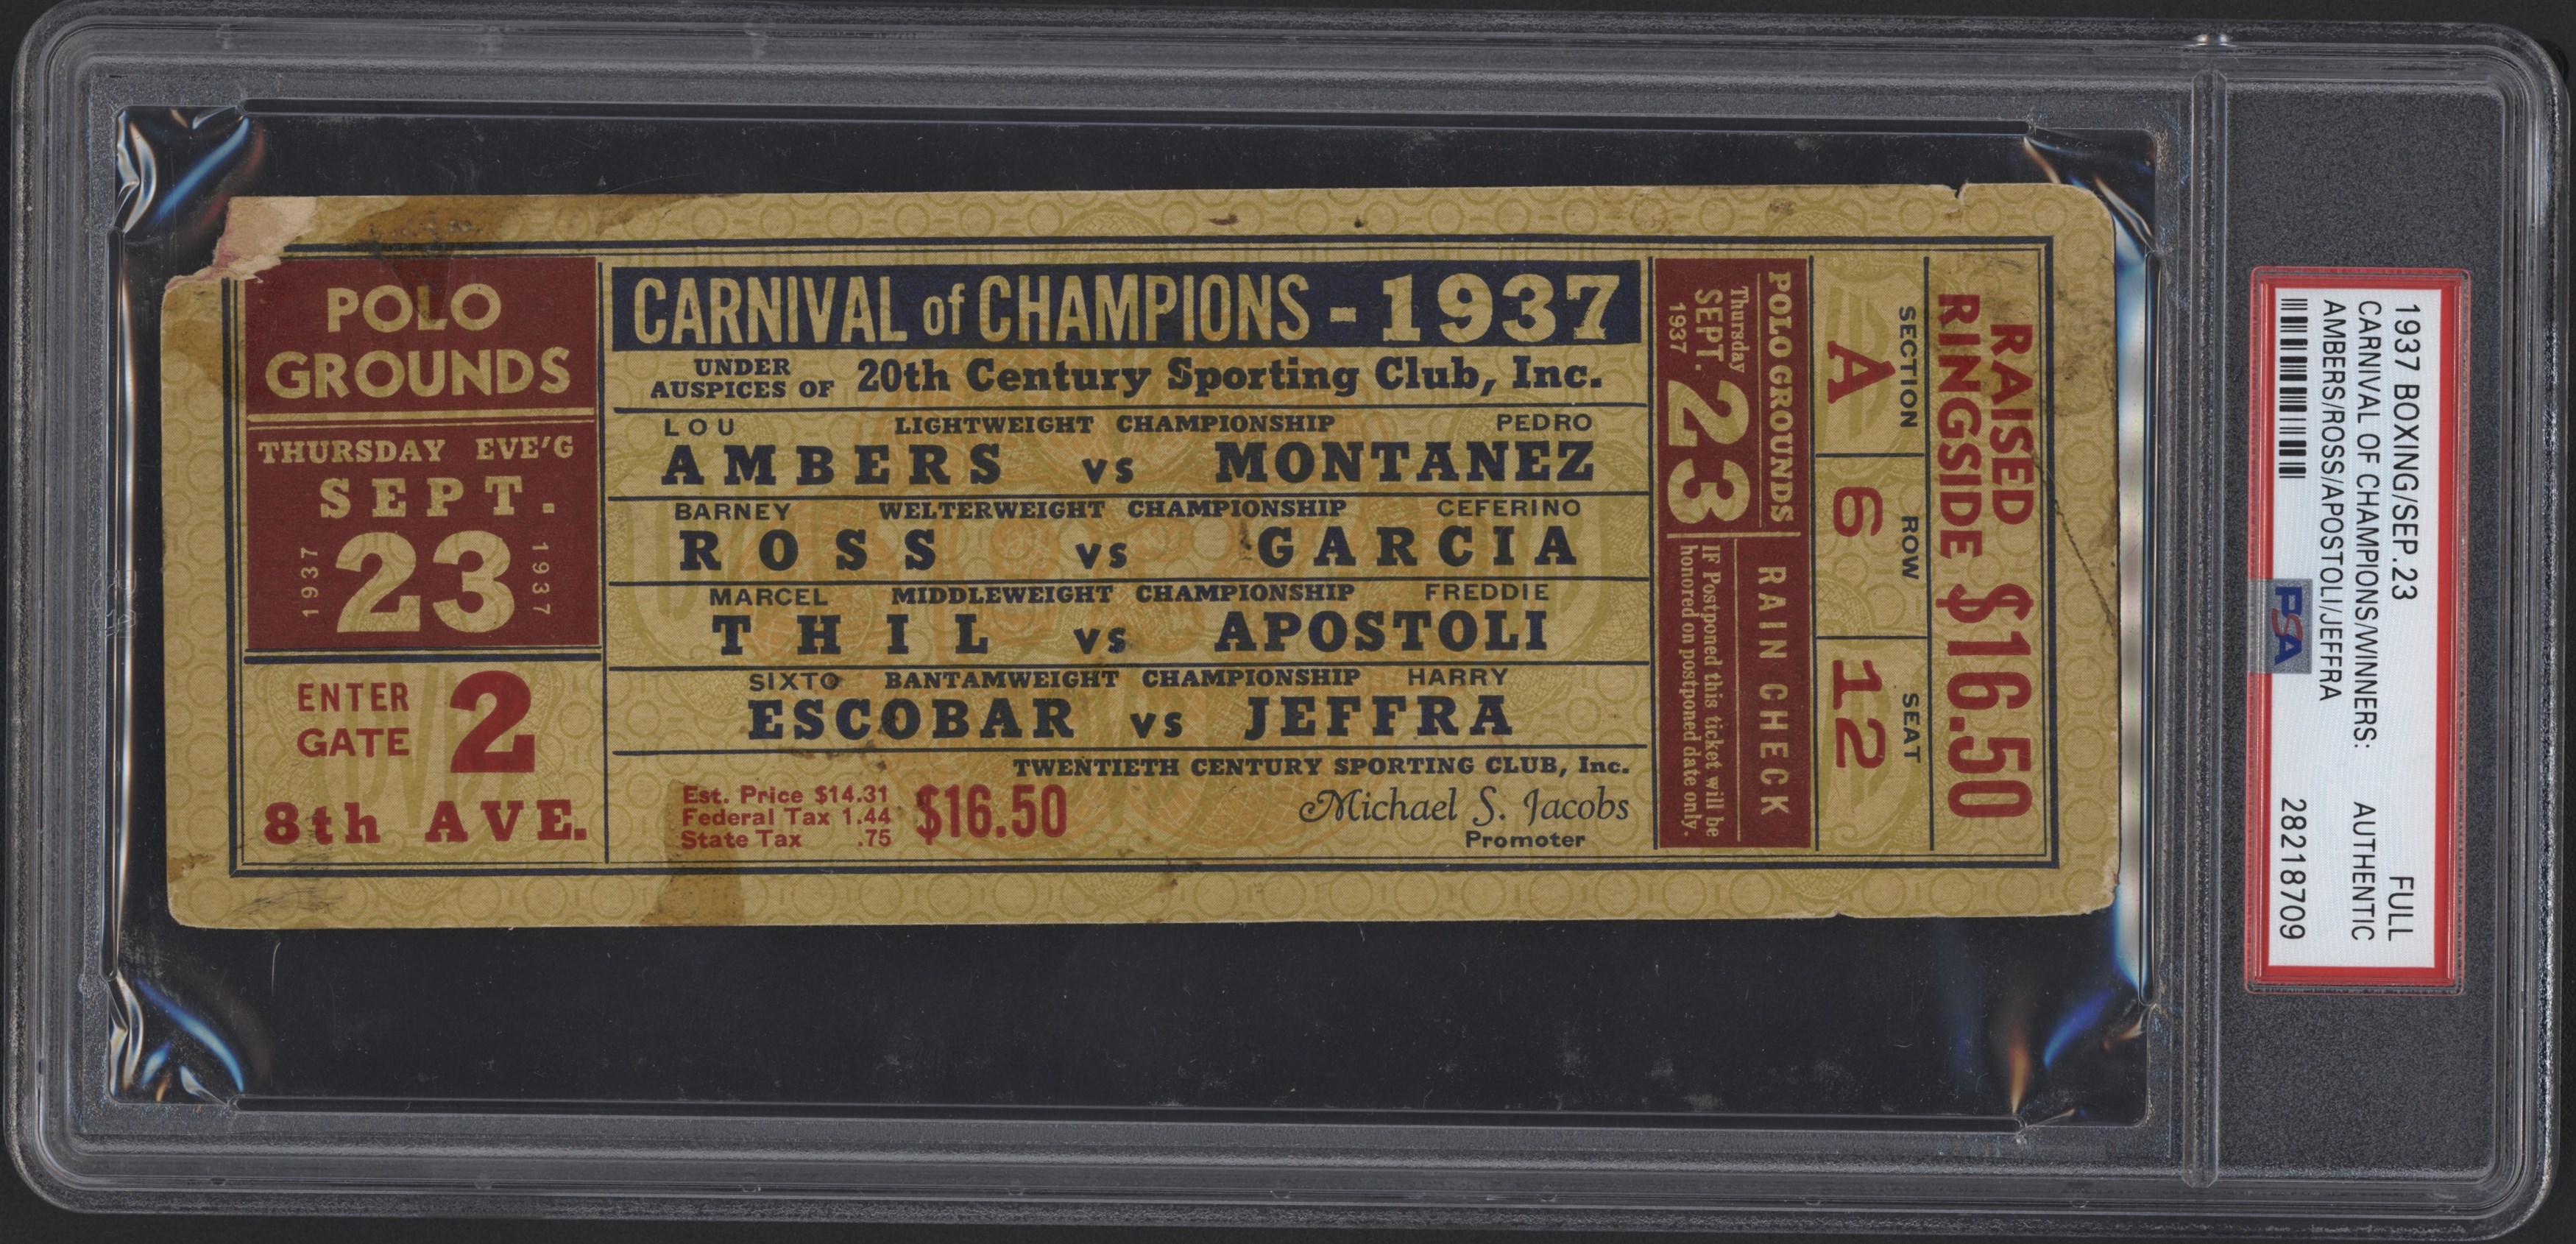 Tickets - 1937 Carnival of Champions Full Ticket